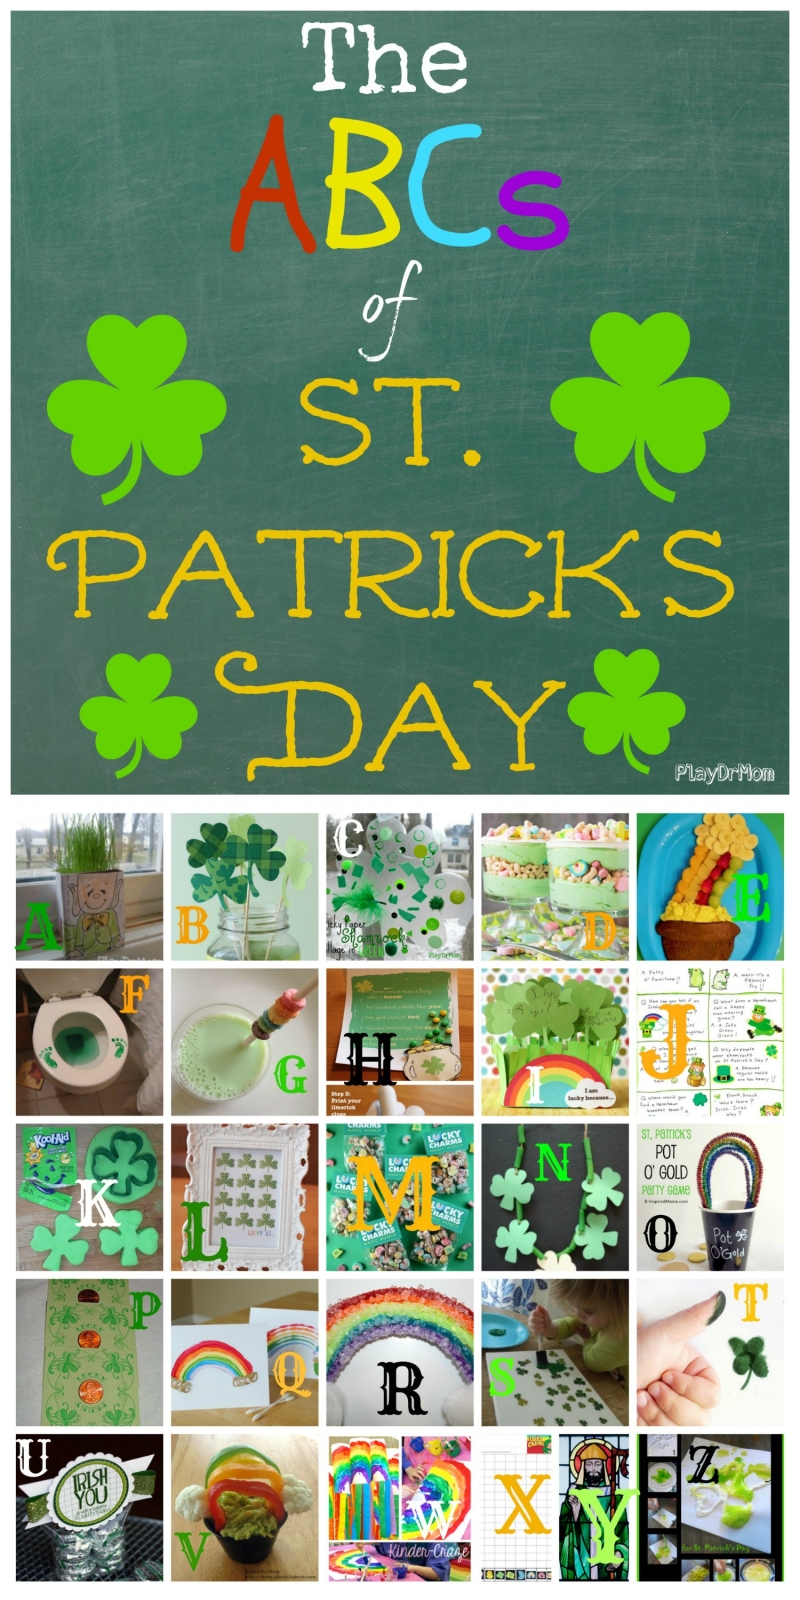 PlayDrMom rounds up the ABCs of St Patrick's Day